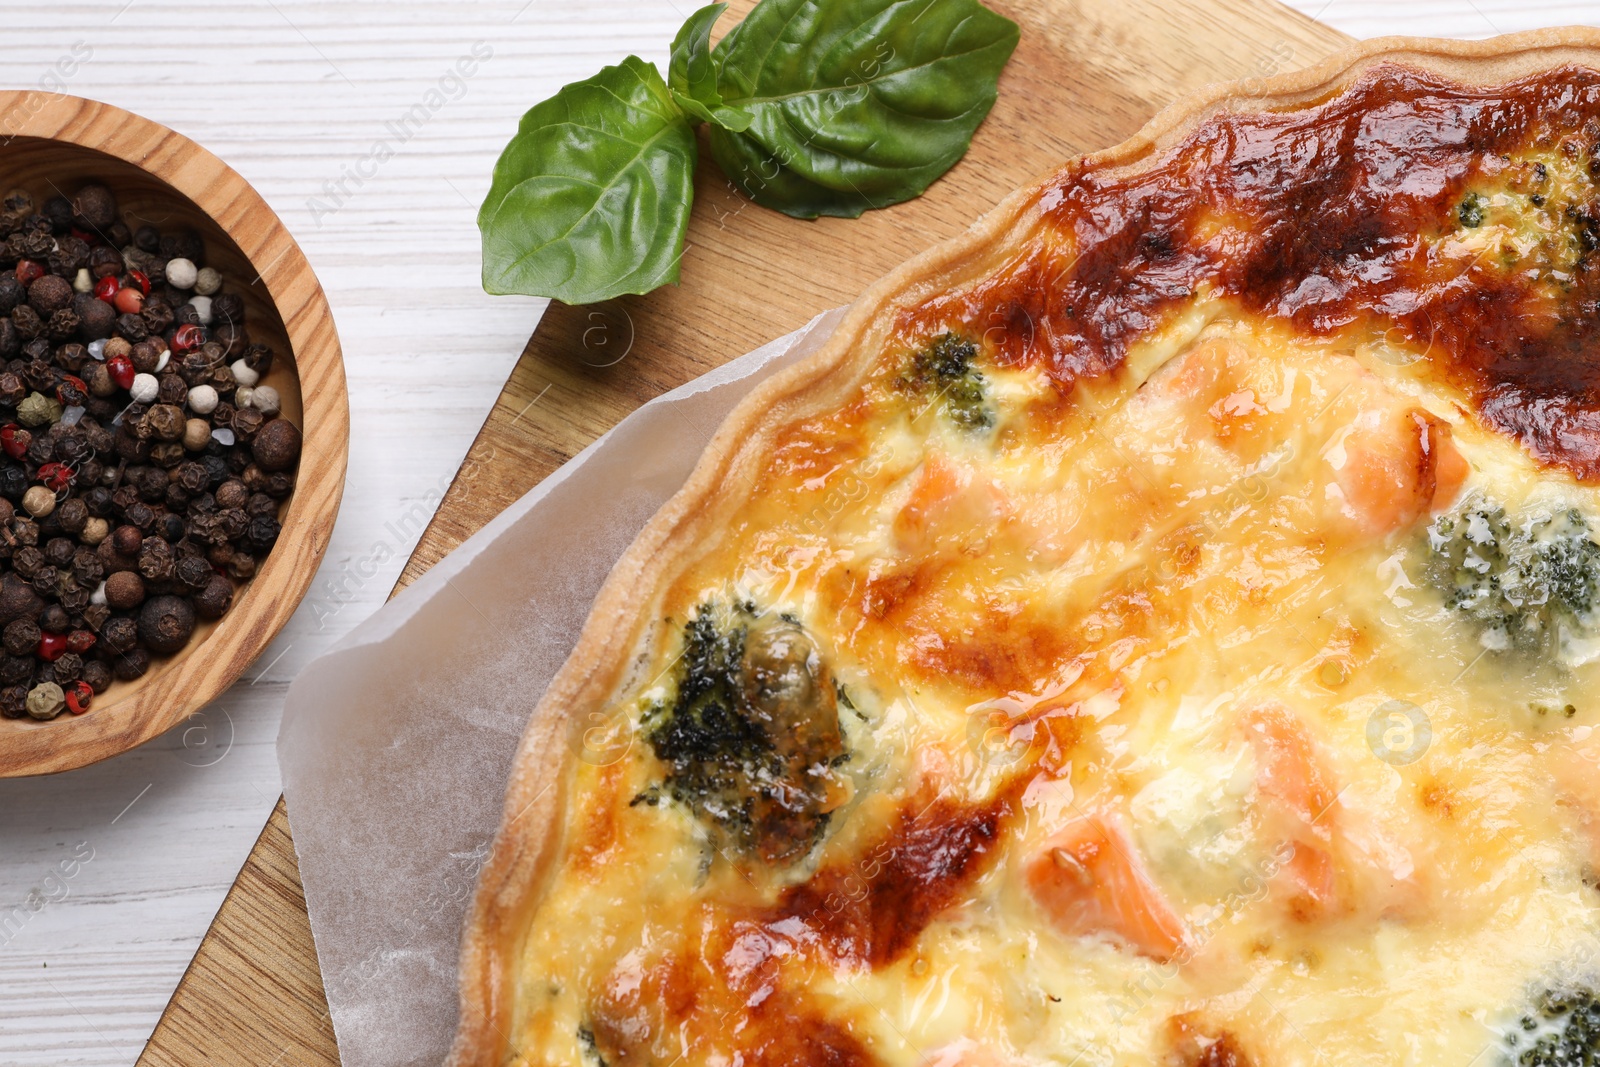 Photo of Delicious homemade quiche with salmon, broccoli, basil leaves and spices on wooden table, flat lay